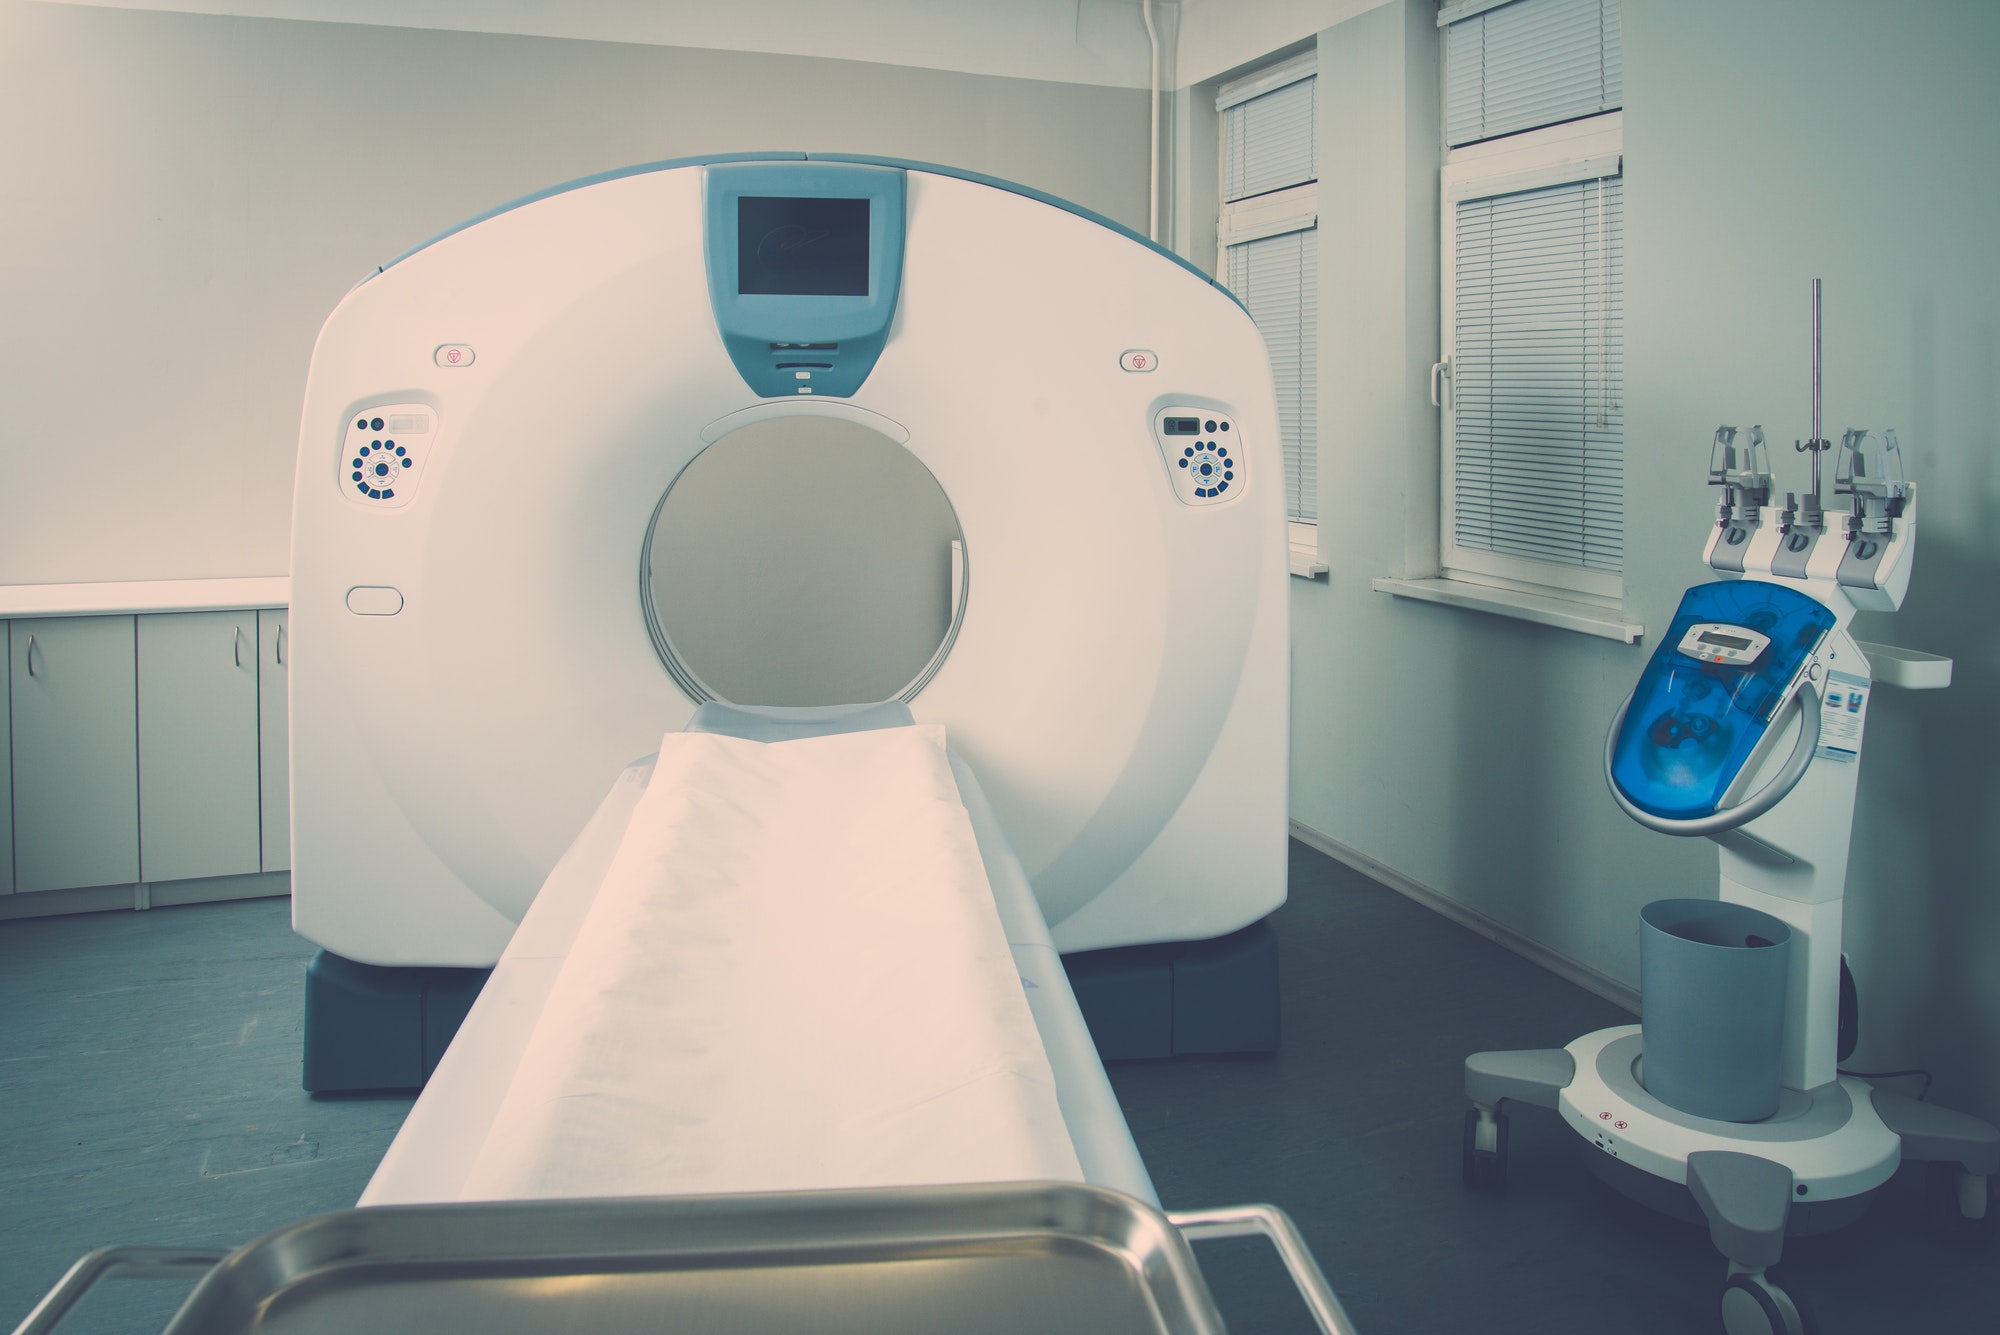 Computed tomography scanner in a hospital